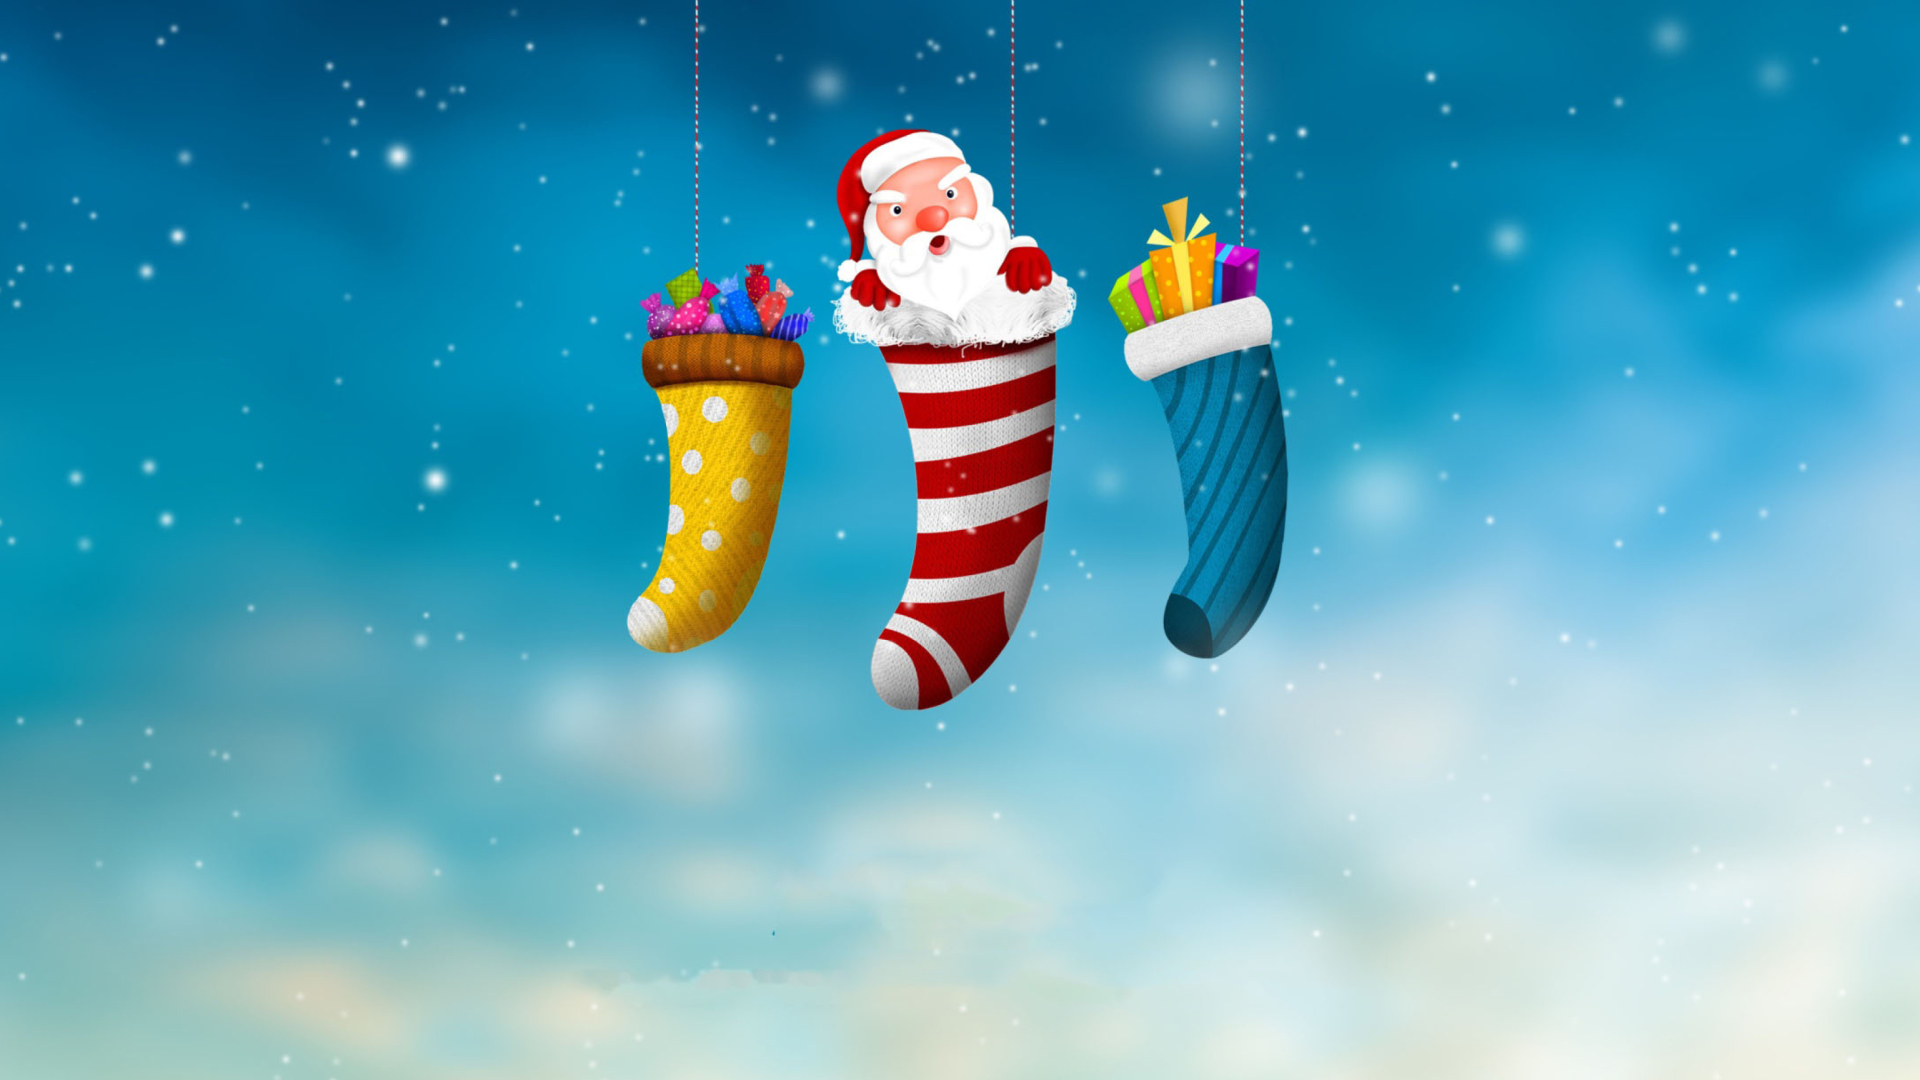 Santa Is Coming To Town wallpaper 1920x1080